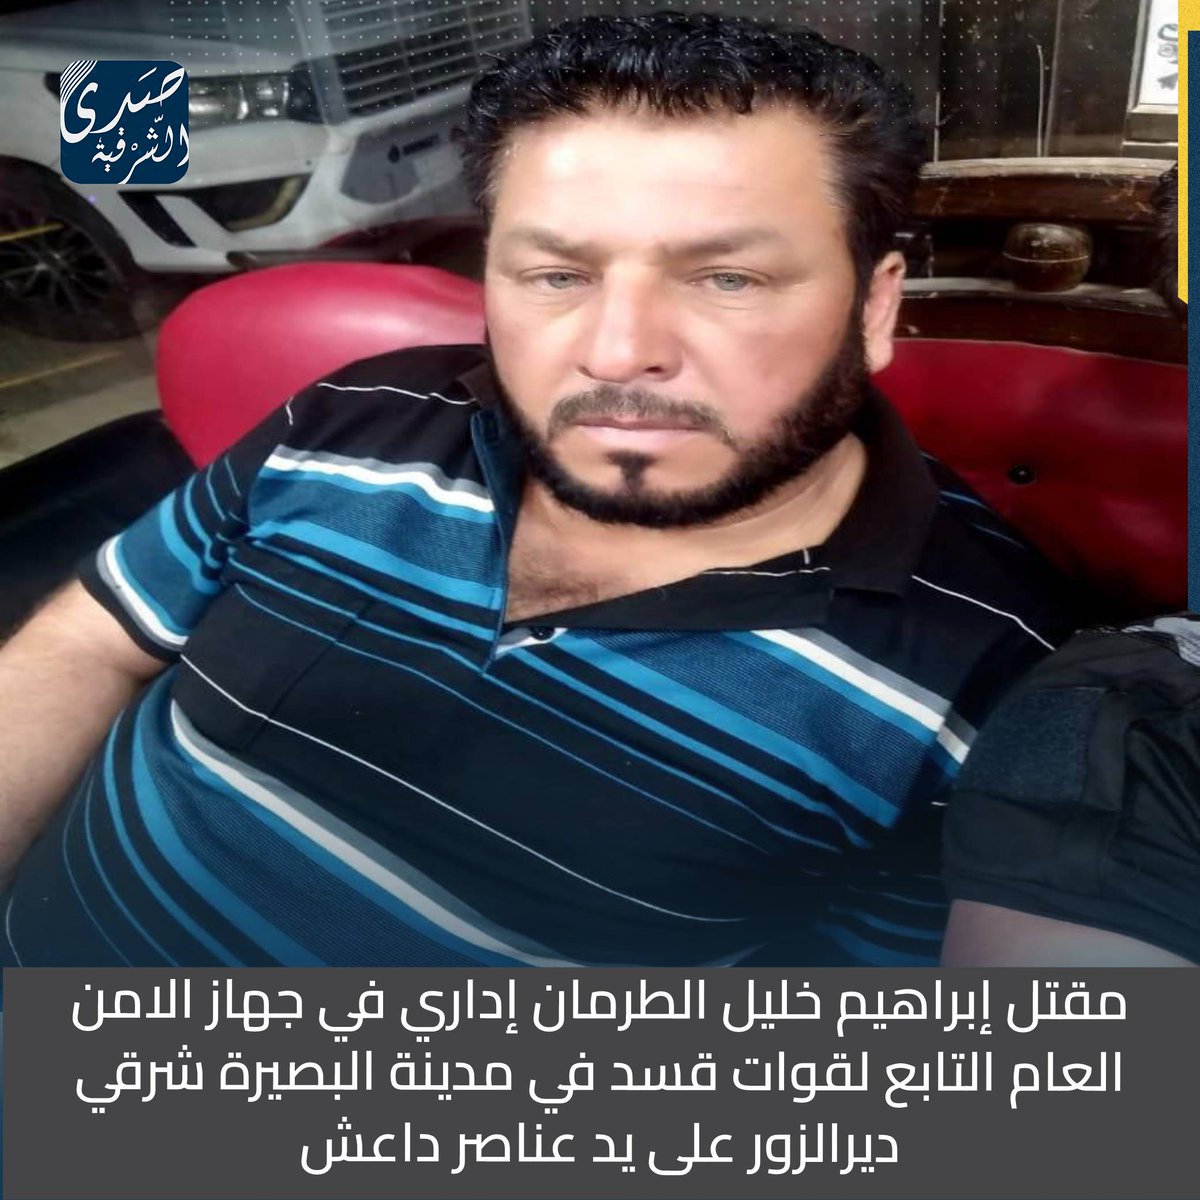 Terrorist elements affiliated with ISIS target Ibrahim Khalil Al-Turman, one of the leaders of the SDF, at Al-Tukaihi Bridge near Al-Attal roundabout in the city of Al-Busaira, east of Deir Ezzor. Al-Turman holds an administrative position in the General Security Service (Asayish).